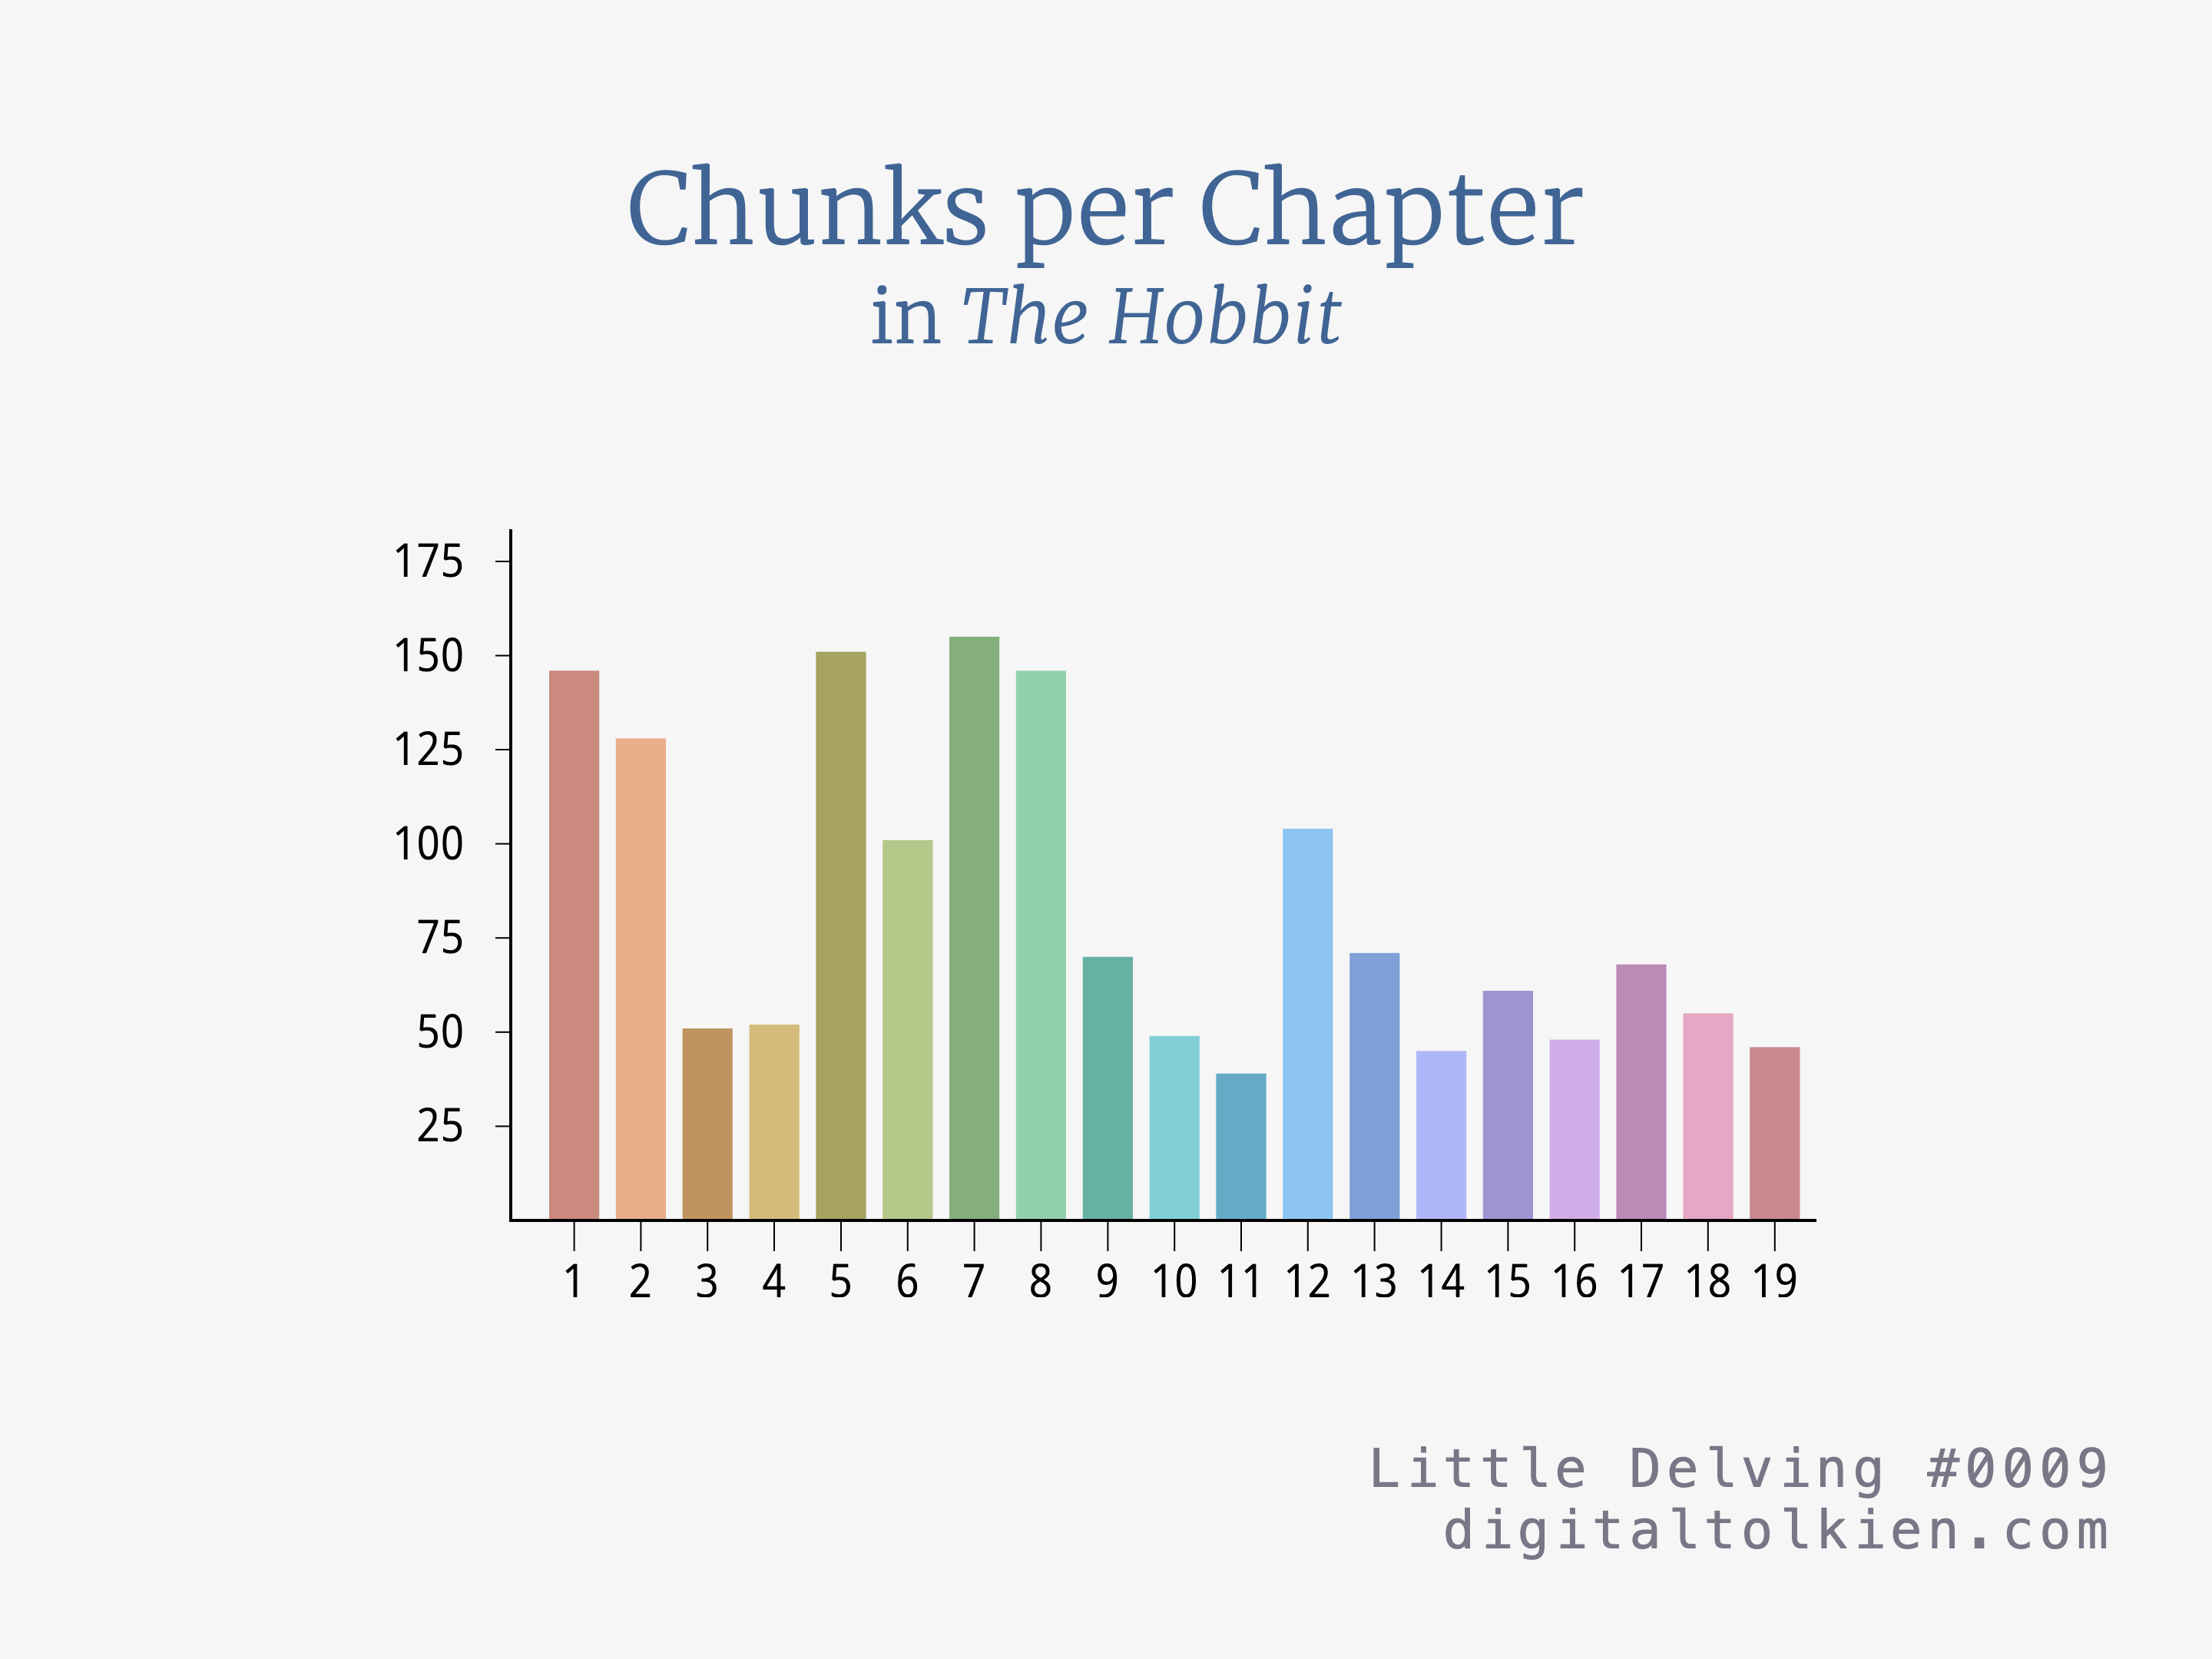 Chunks per Chapter in The Hobbit
        Bar chart with 19 bars, one for each chapter of The Hobbit.
        Little Delving #0009
        digitaltolkien.com
        